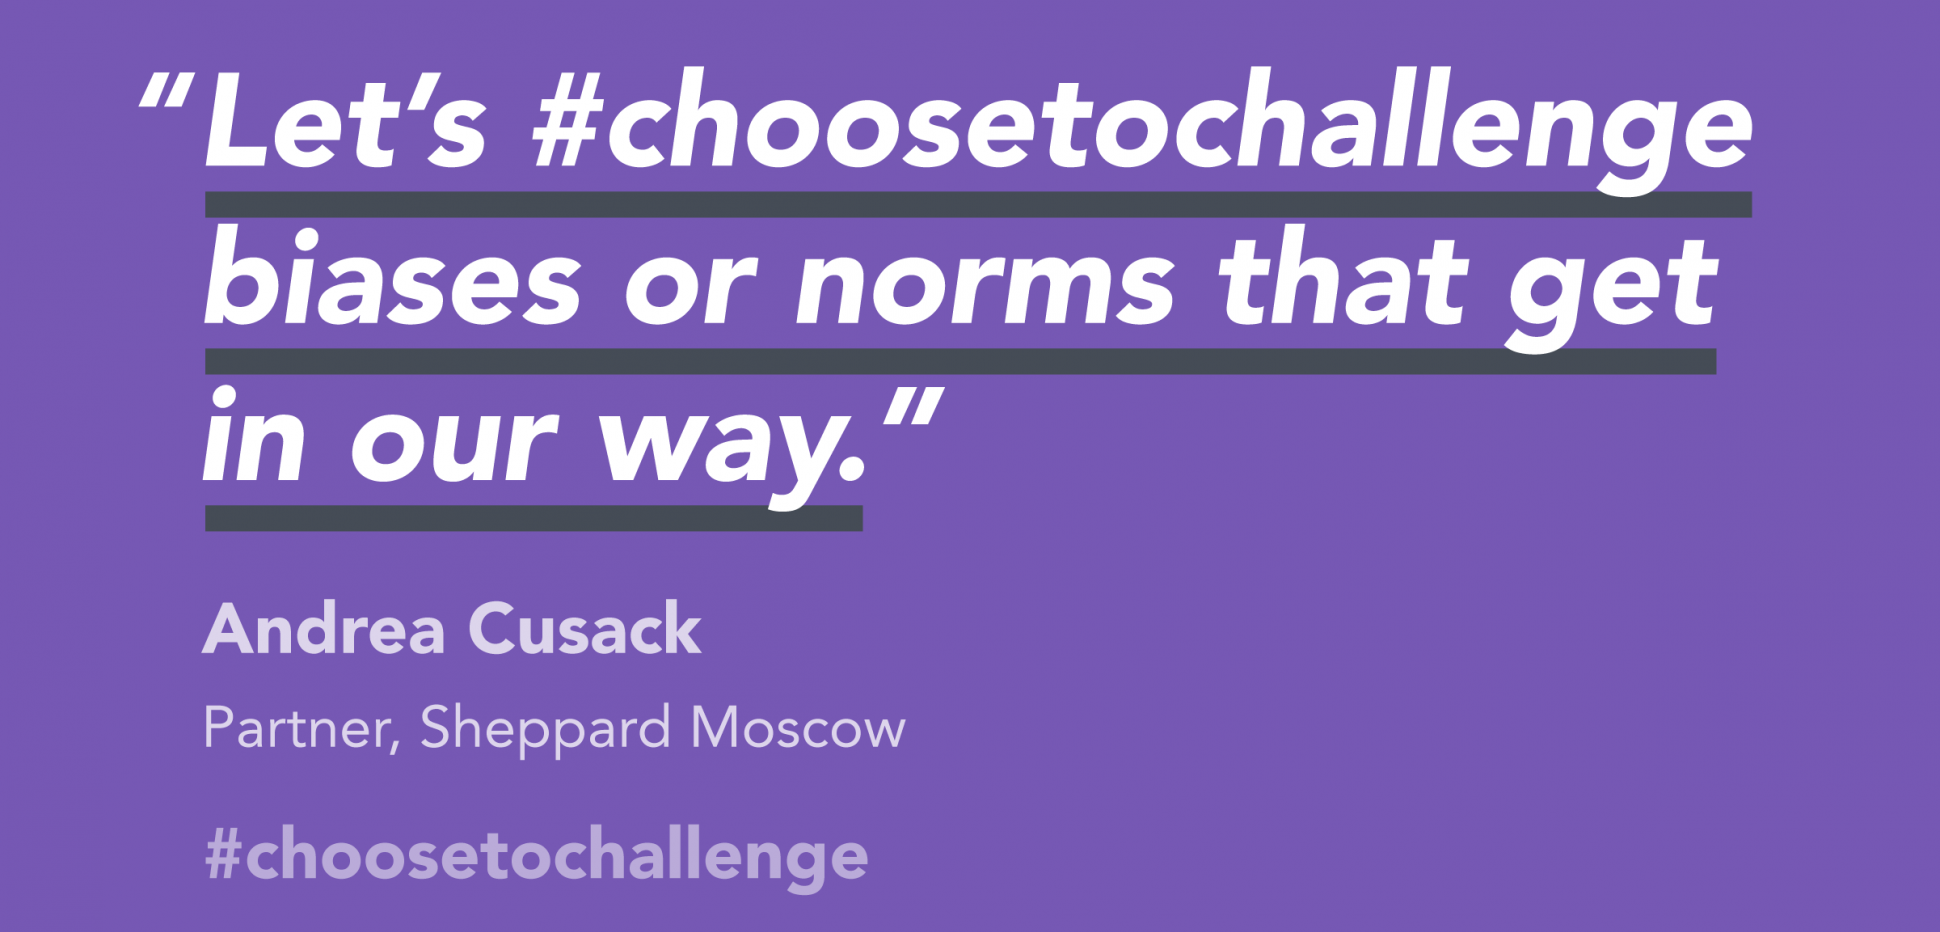 1200x630_sm_choose_to_challenge_social_card_03_at2x.png